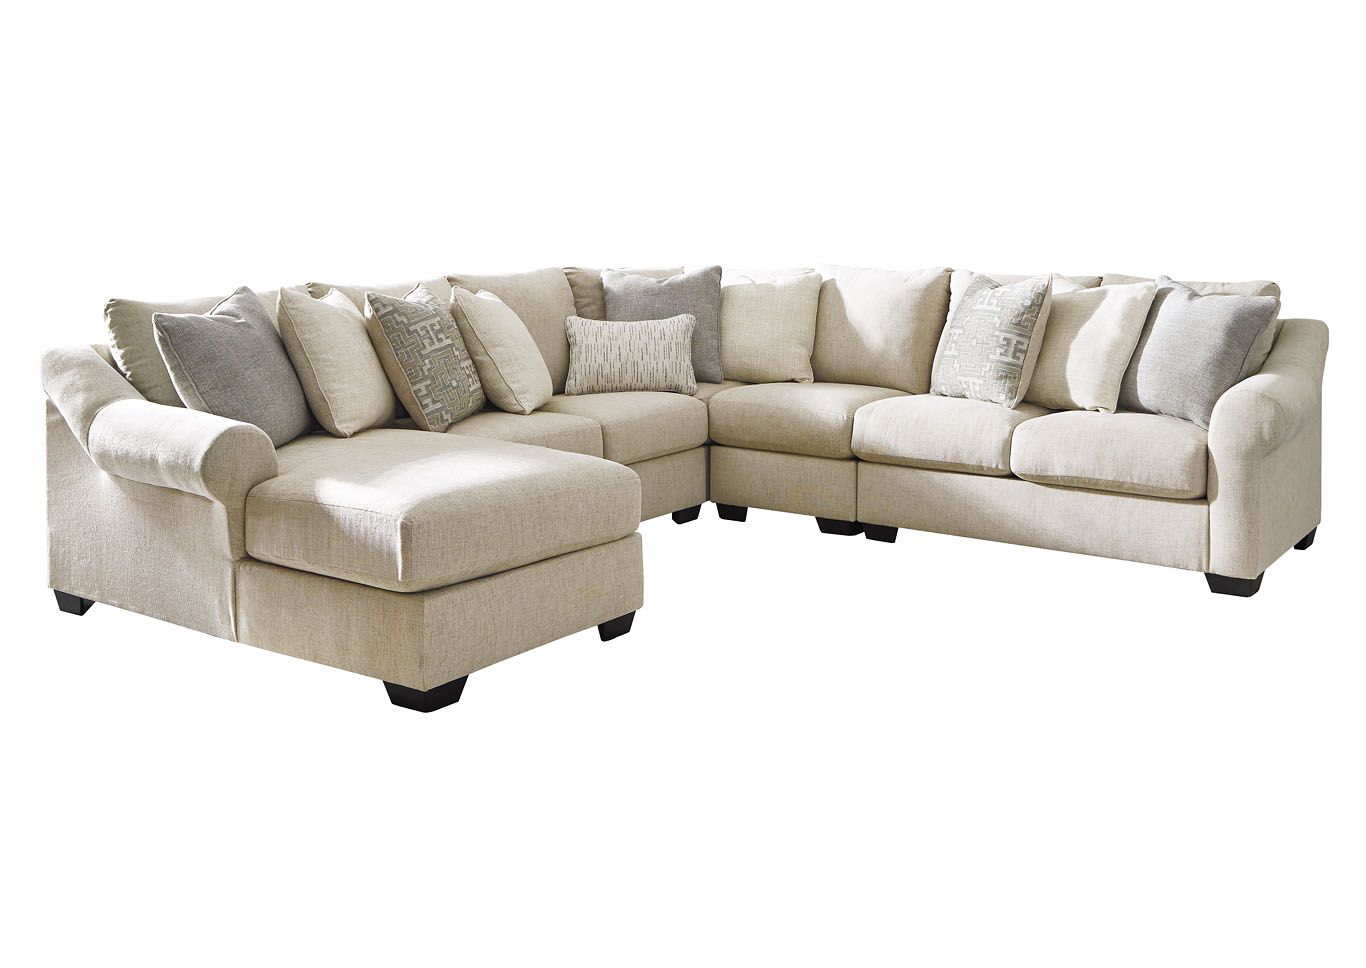 Carnaby 5 Piece Sectional Chaise Ashley Furniture Throughout Setoril Modern Sectional Sofa Swith Chaise Woven Linen (View 5 of 15)